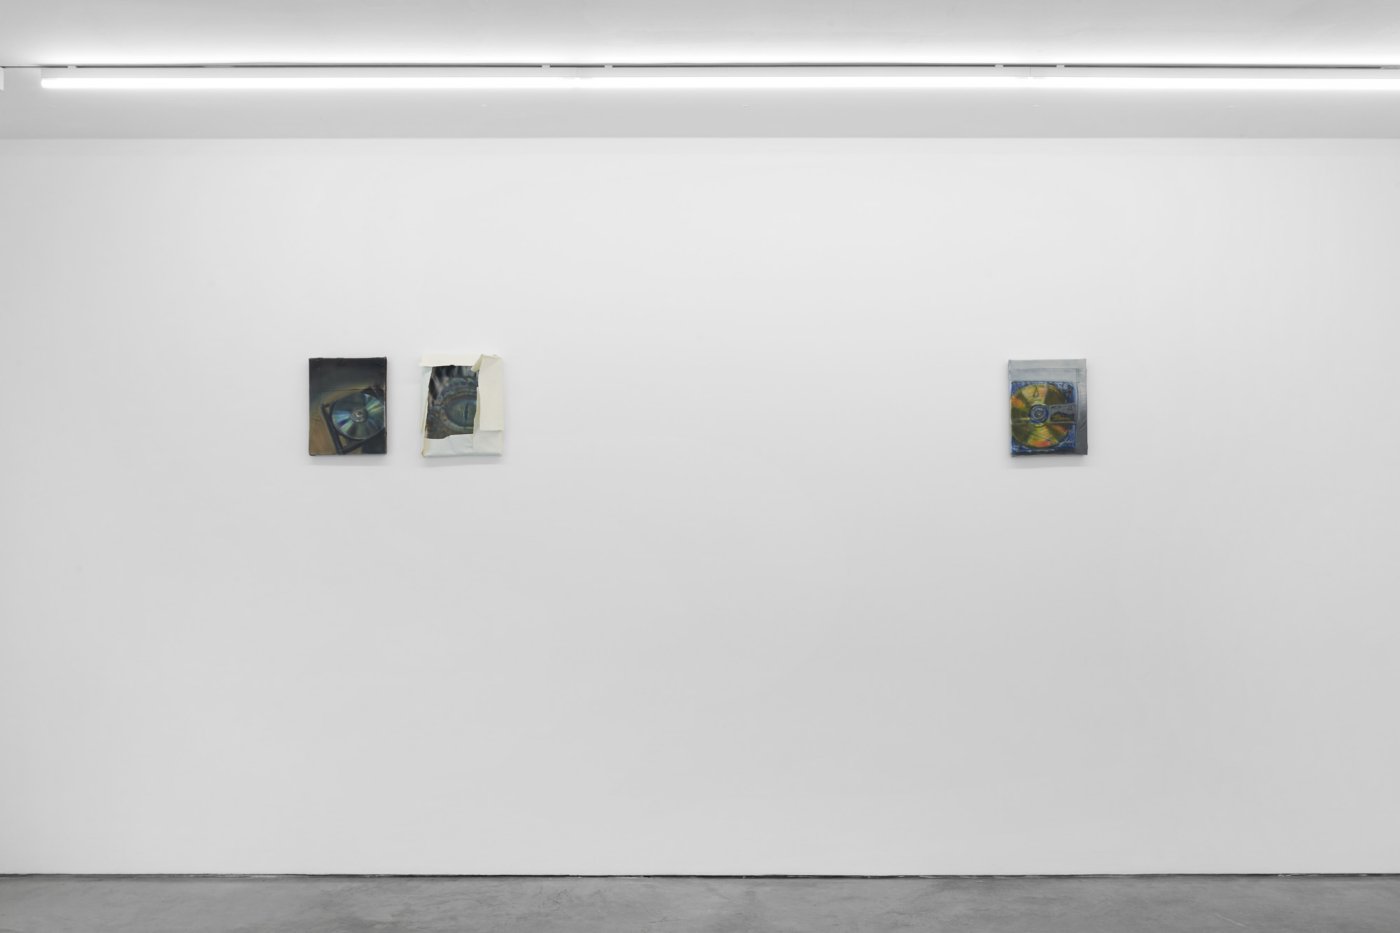 Installation image for Tomas Harker, Jack Jubb, Mia Middleton and Caroline Zurmely: Apotrope, at Cob Gallery